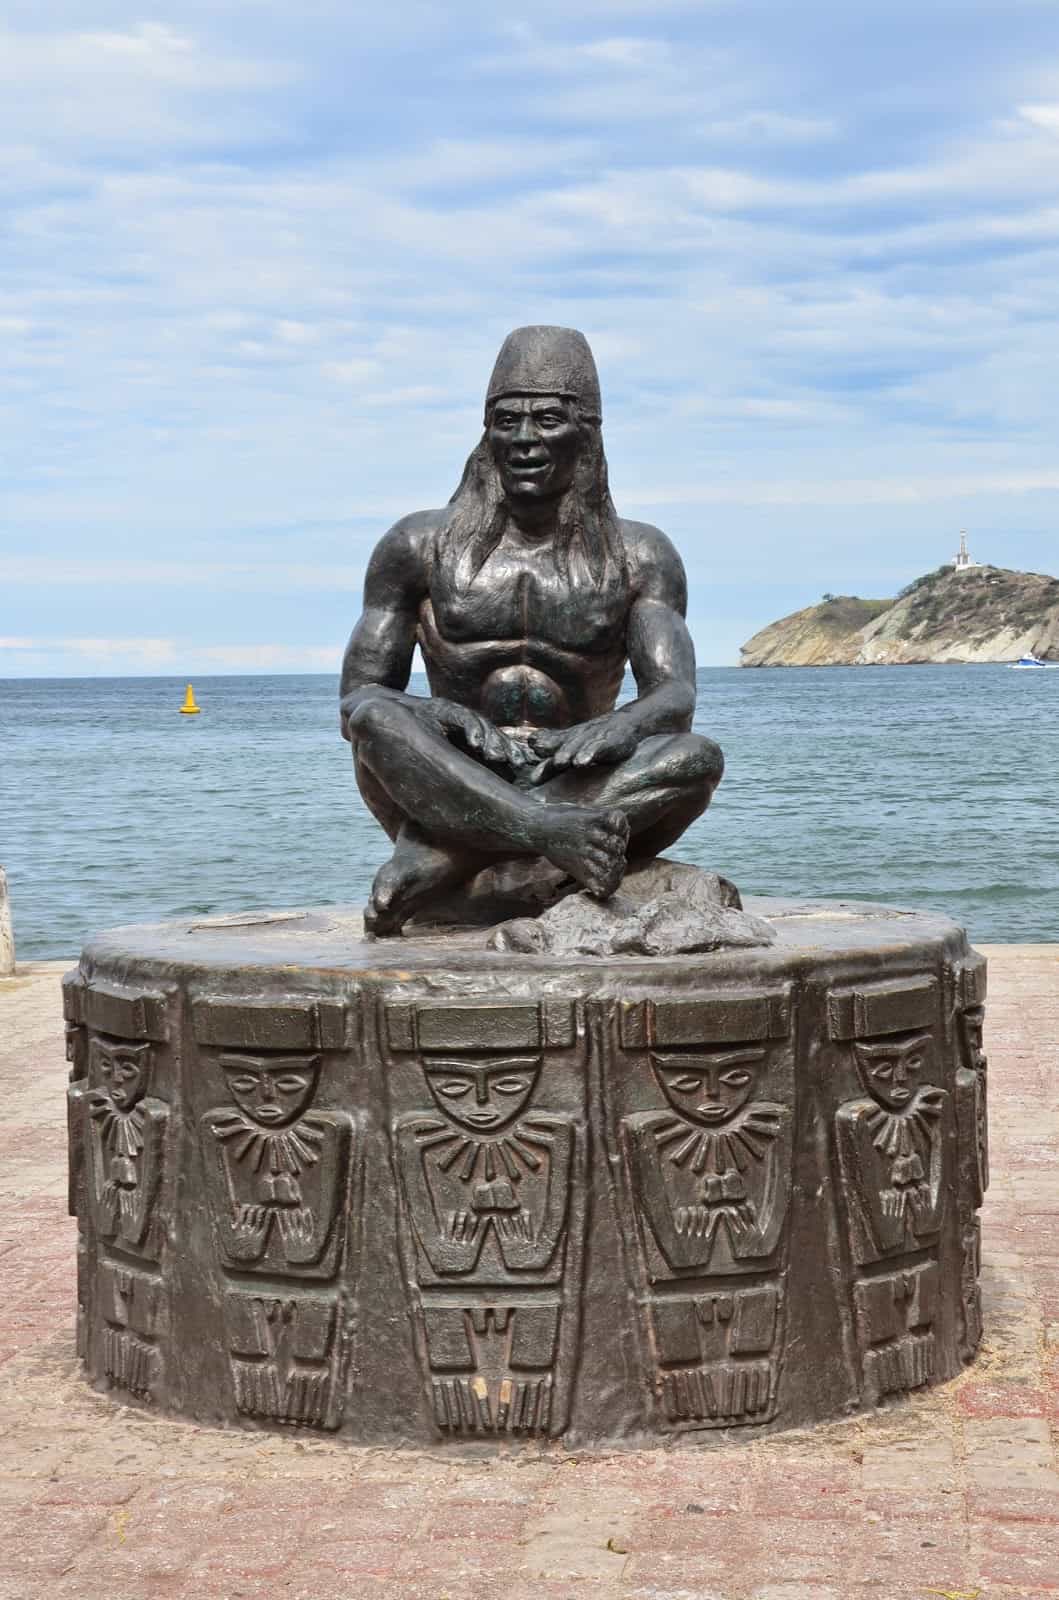 Tairona statue on the Malecón in Santa Marta, Magdalena, Colombia